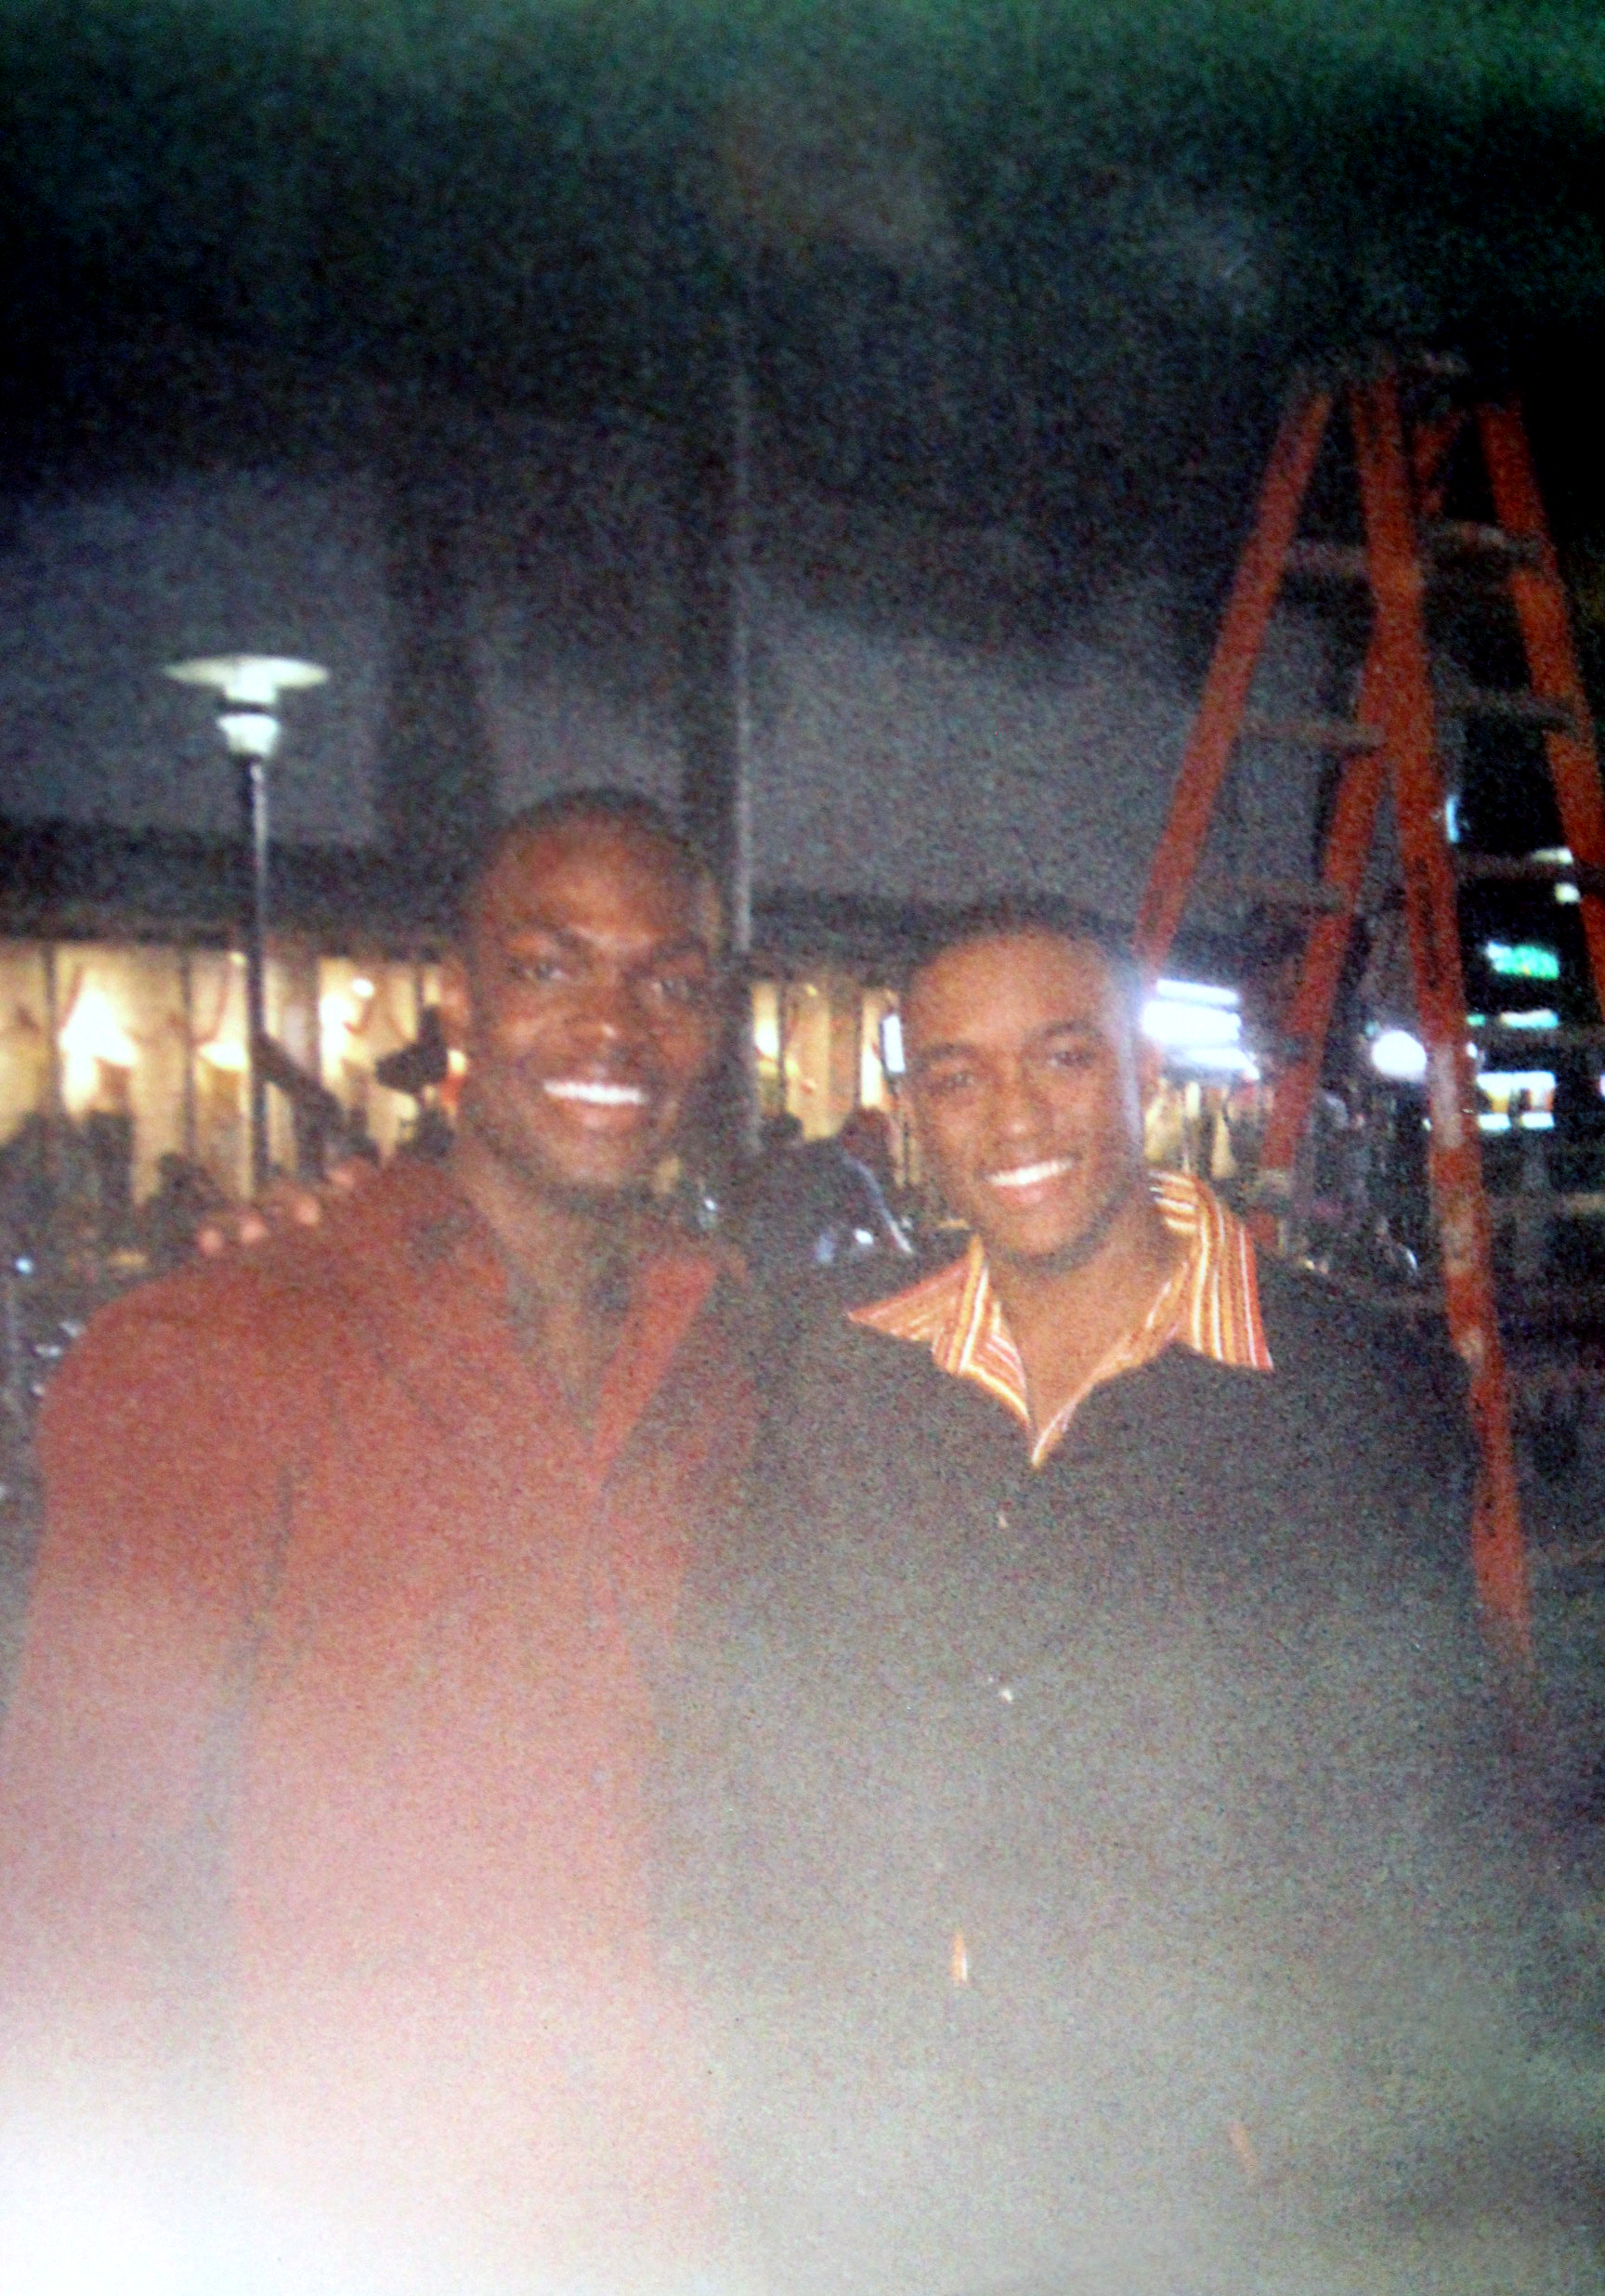 Behind the scenes image of actor, Lee Thompson Young and photo stunt double/Stand-In, Kourtney Brown on Set of 